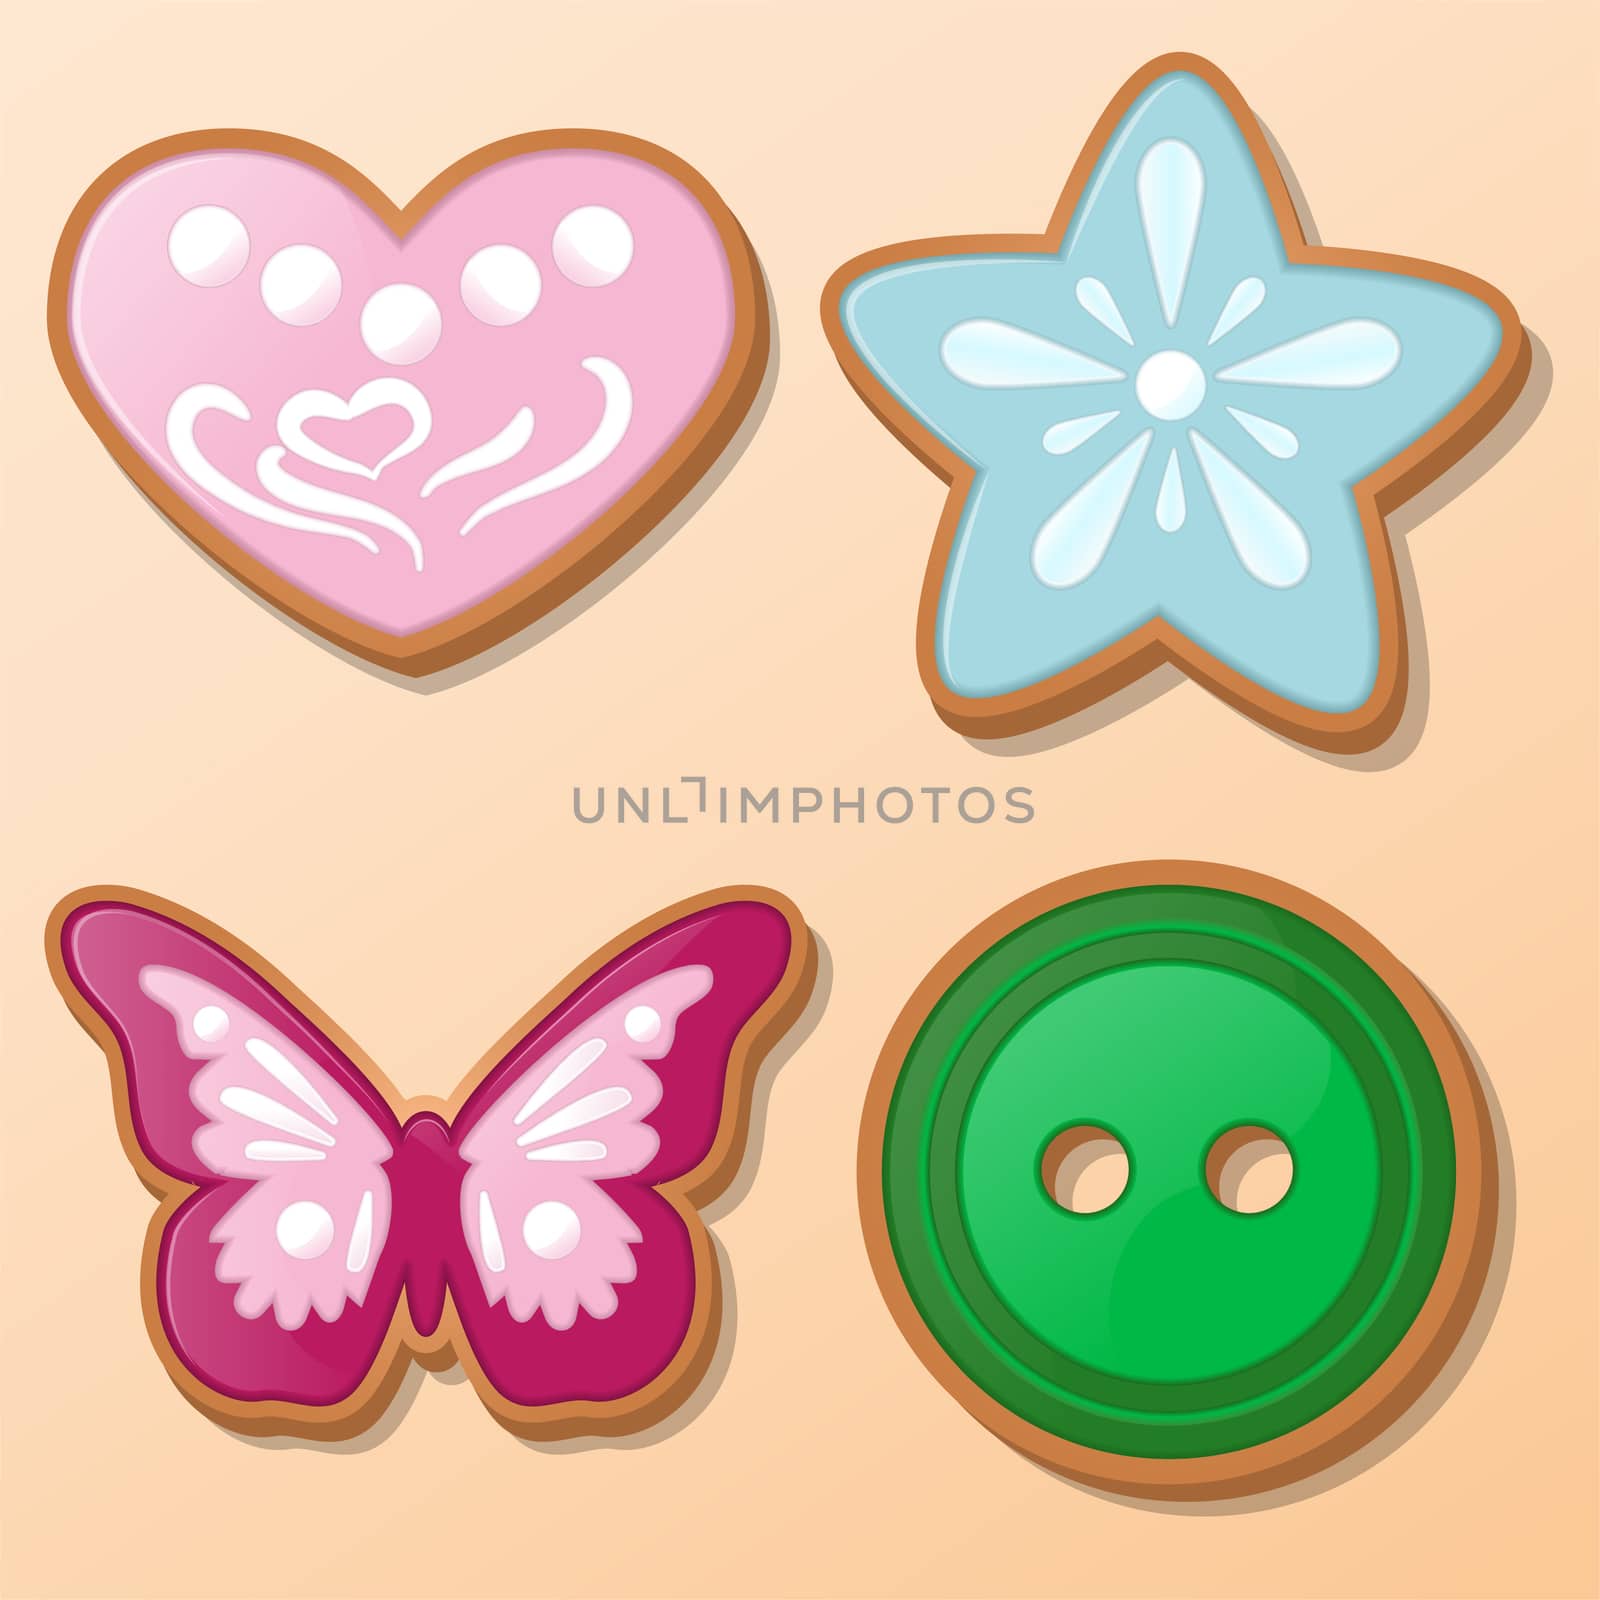 heart, star, butterfly, button in the form of a cookie on a bright background. illustration